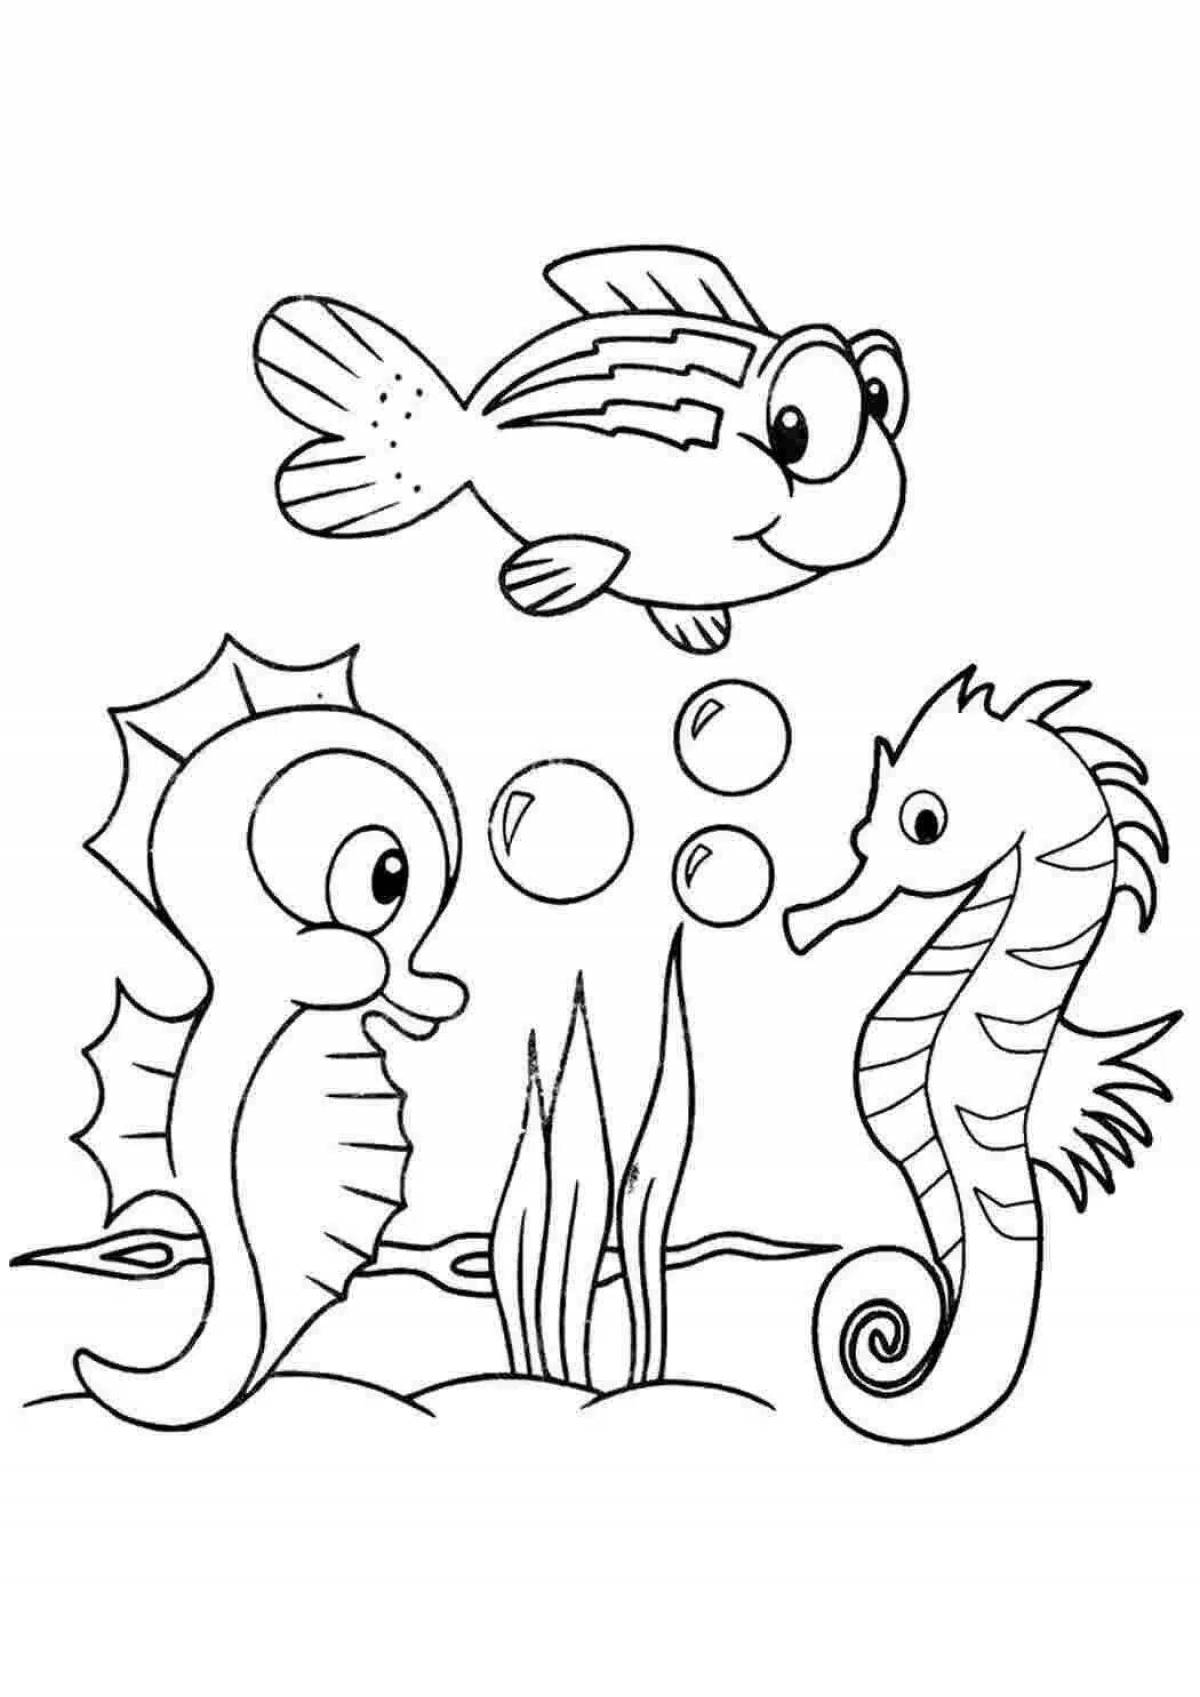 Colorful seahorse coloring page for kids